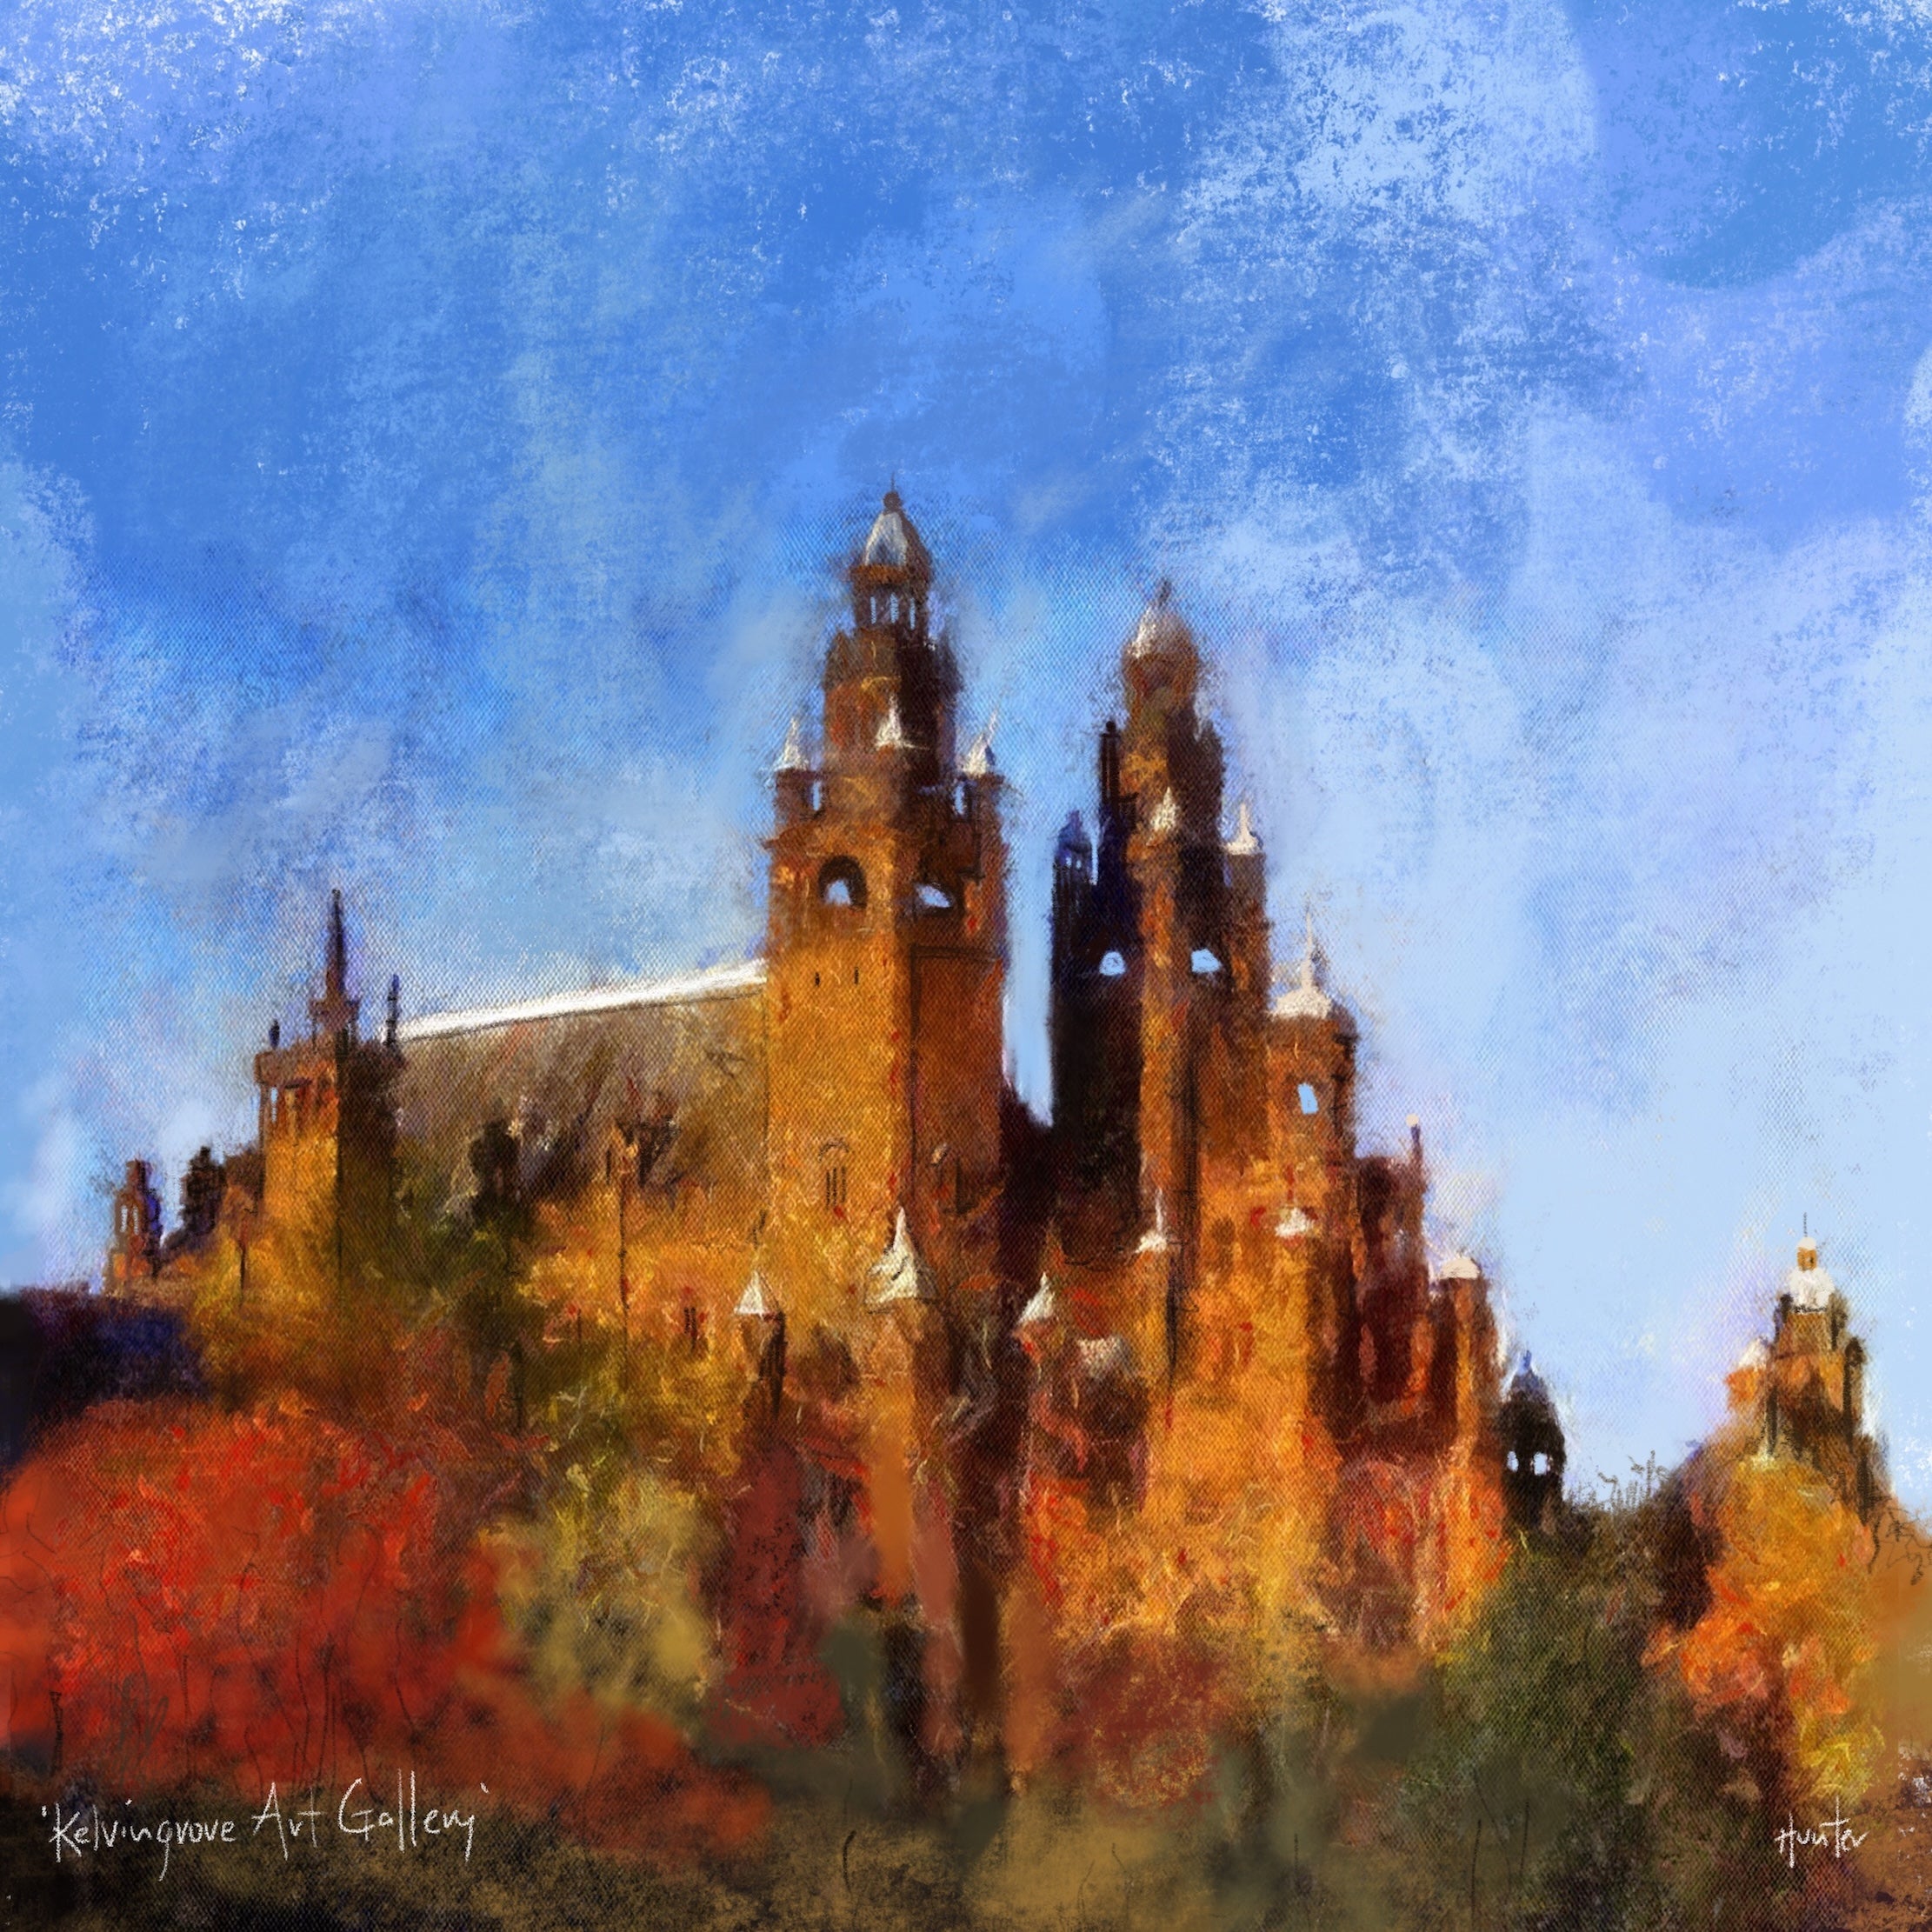 Kelvingrove Art Gallery | Scotland In Your Pocket Print-Scotland In Your Pocket Framed Prints-Edinburgh & Glasgow Art Gallery-Paintings, Prints, Homeware, Art Gifts From Scotland By Scottish Artist Kevin Hunter